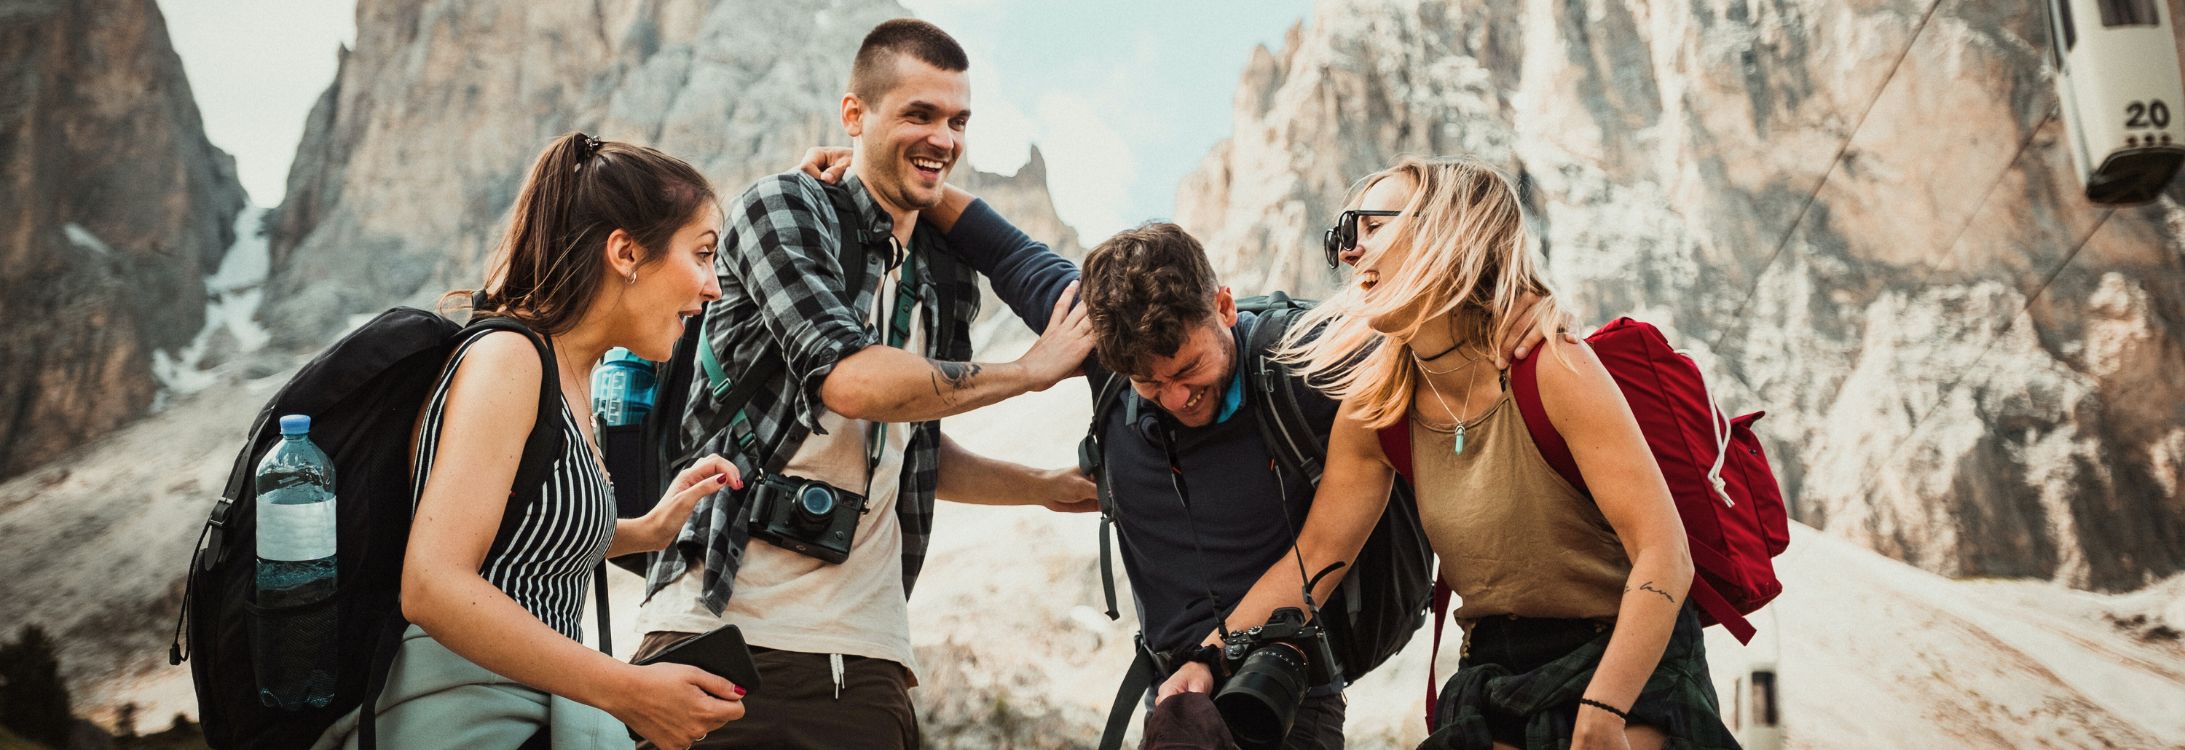 Friends laughing on a mountain